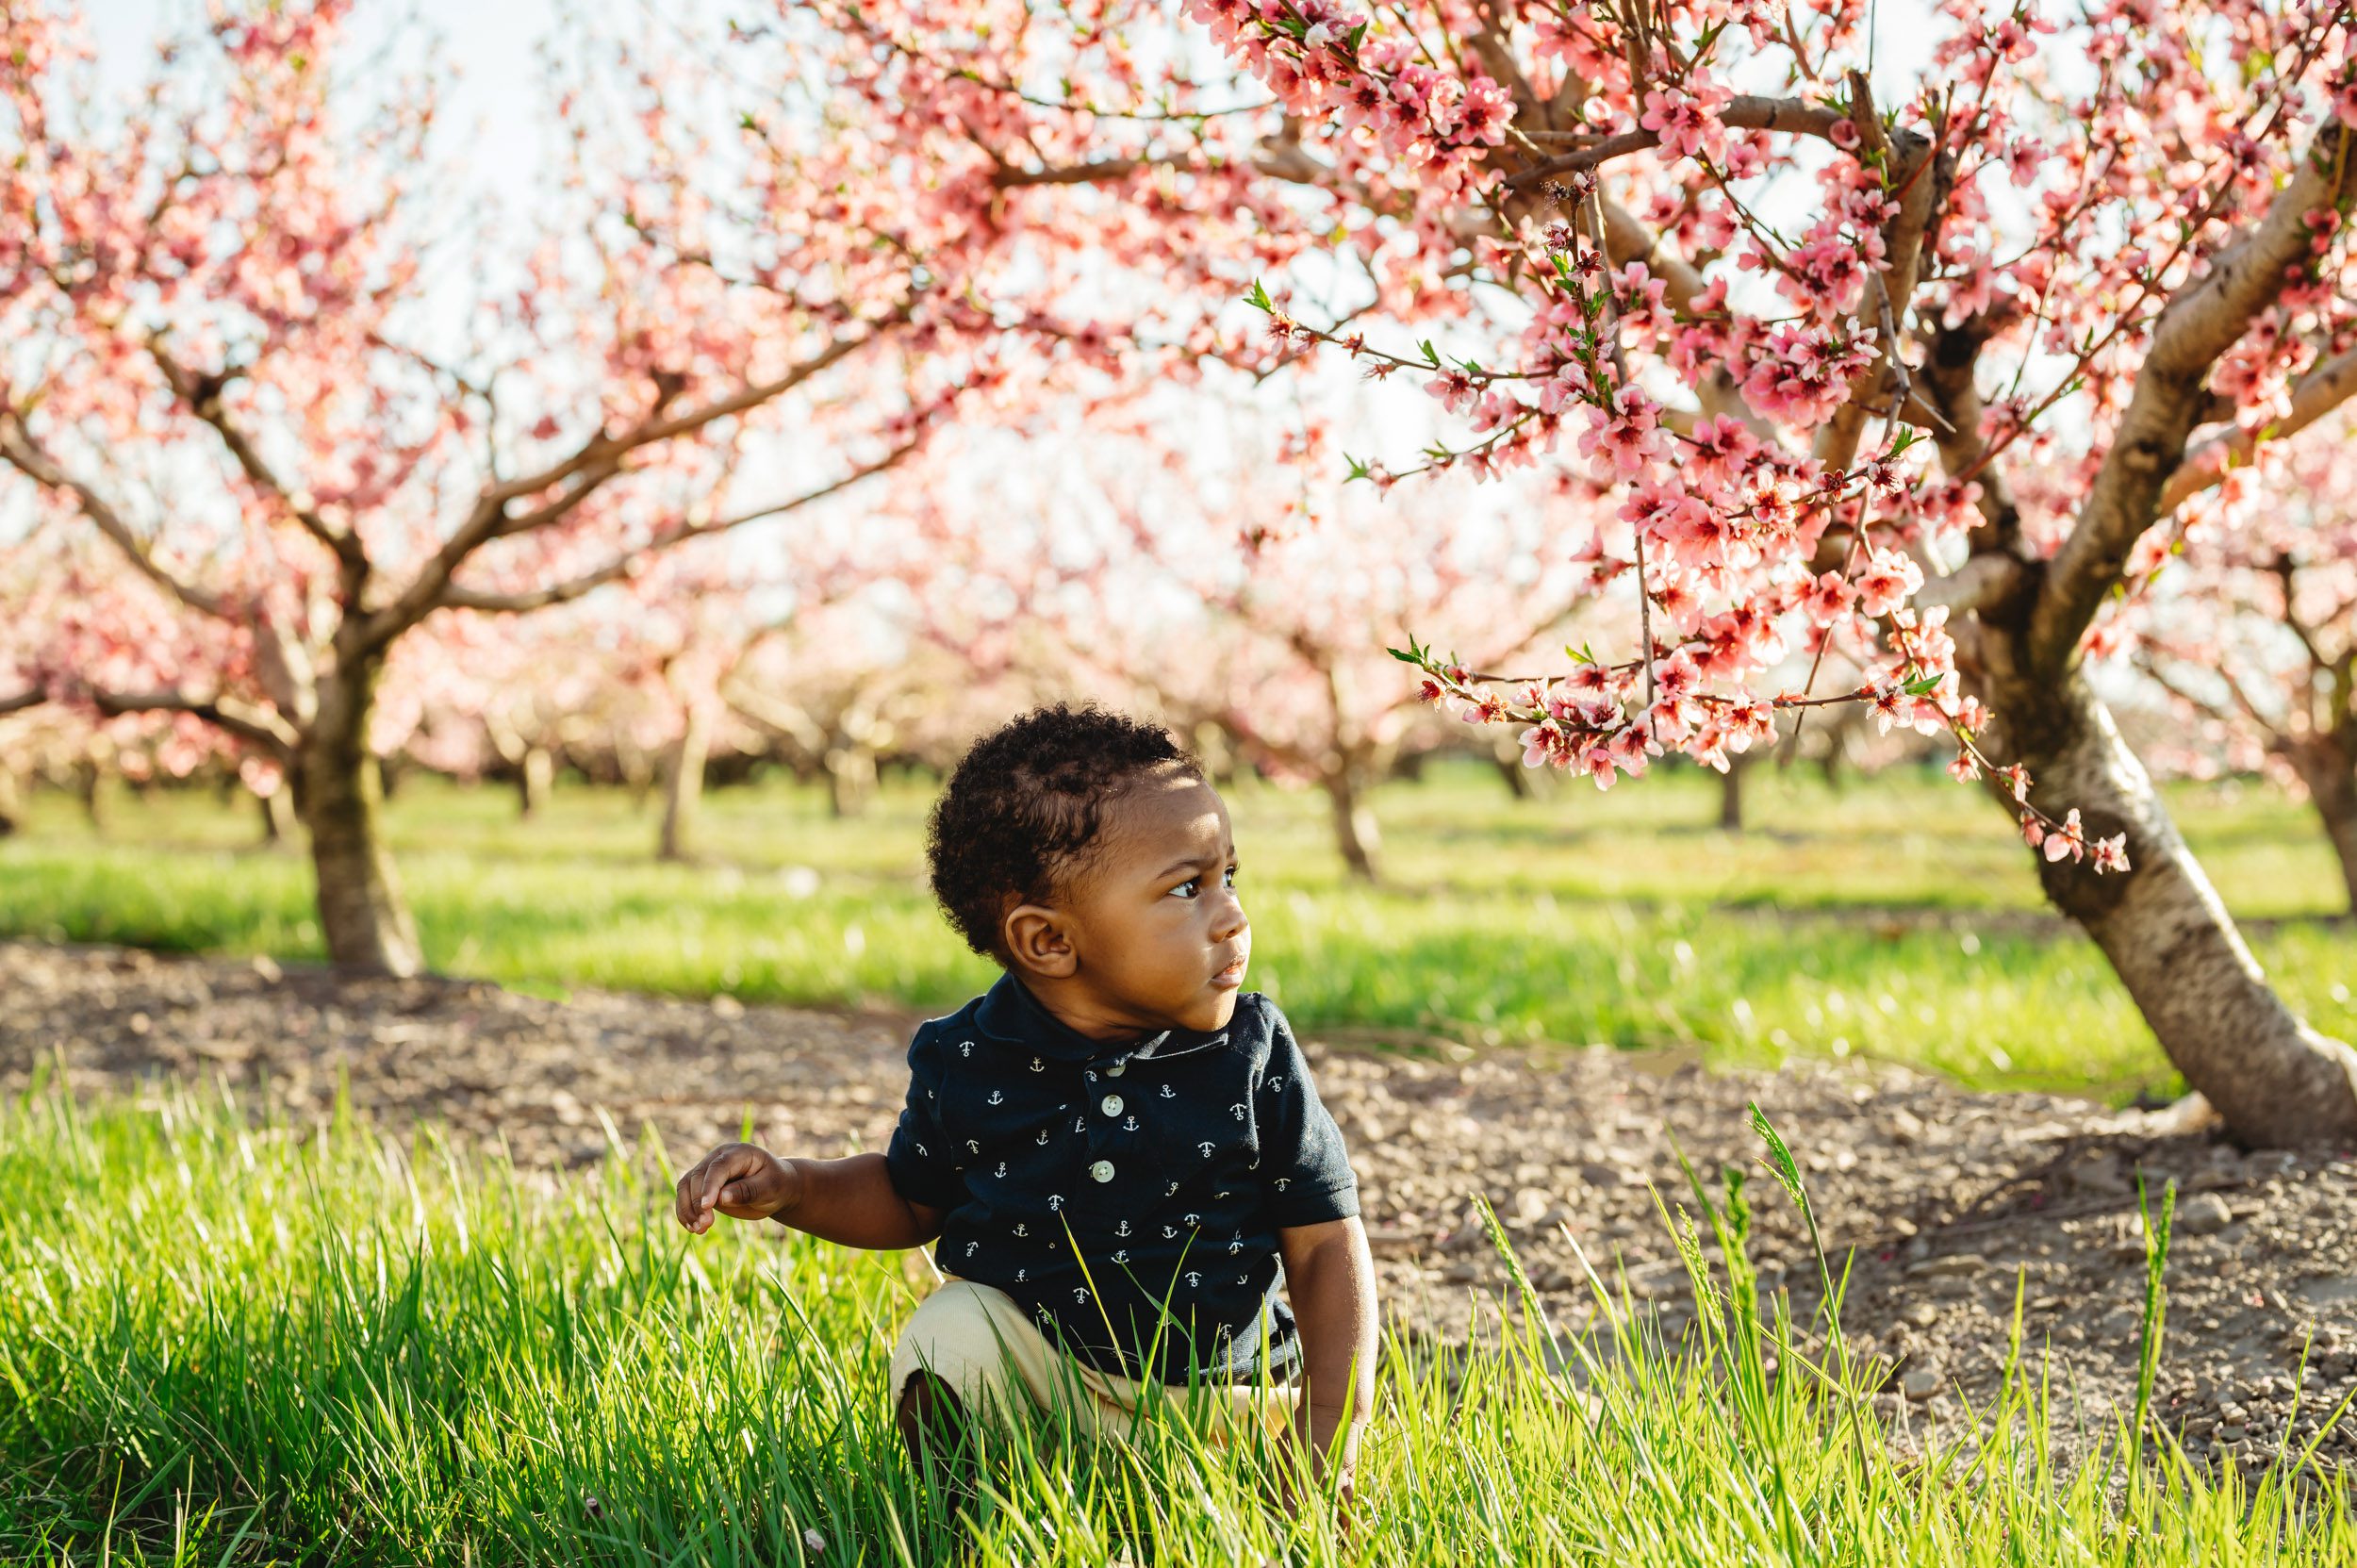 a baby boy sitting in the grass in an orchard full of peach trees in bloom during a spring mini session